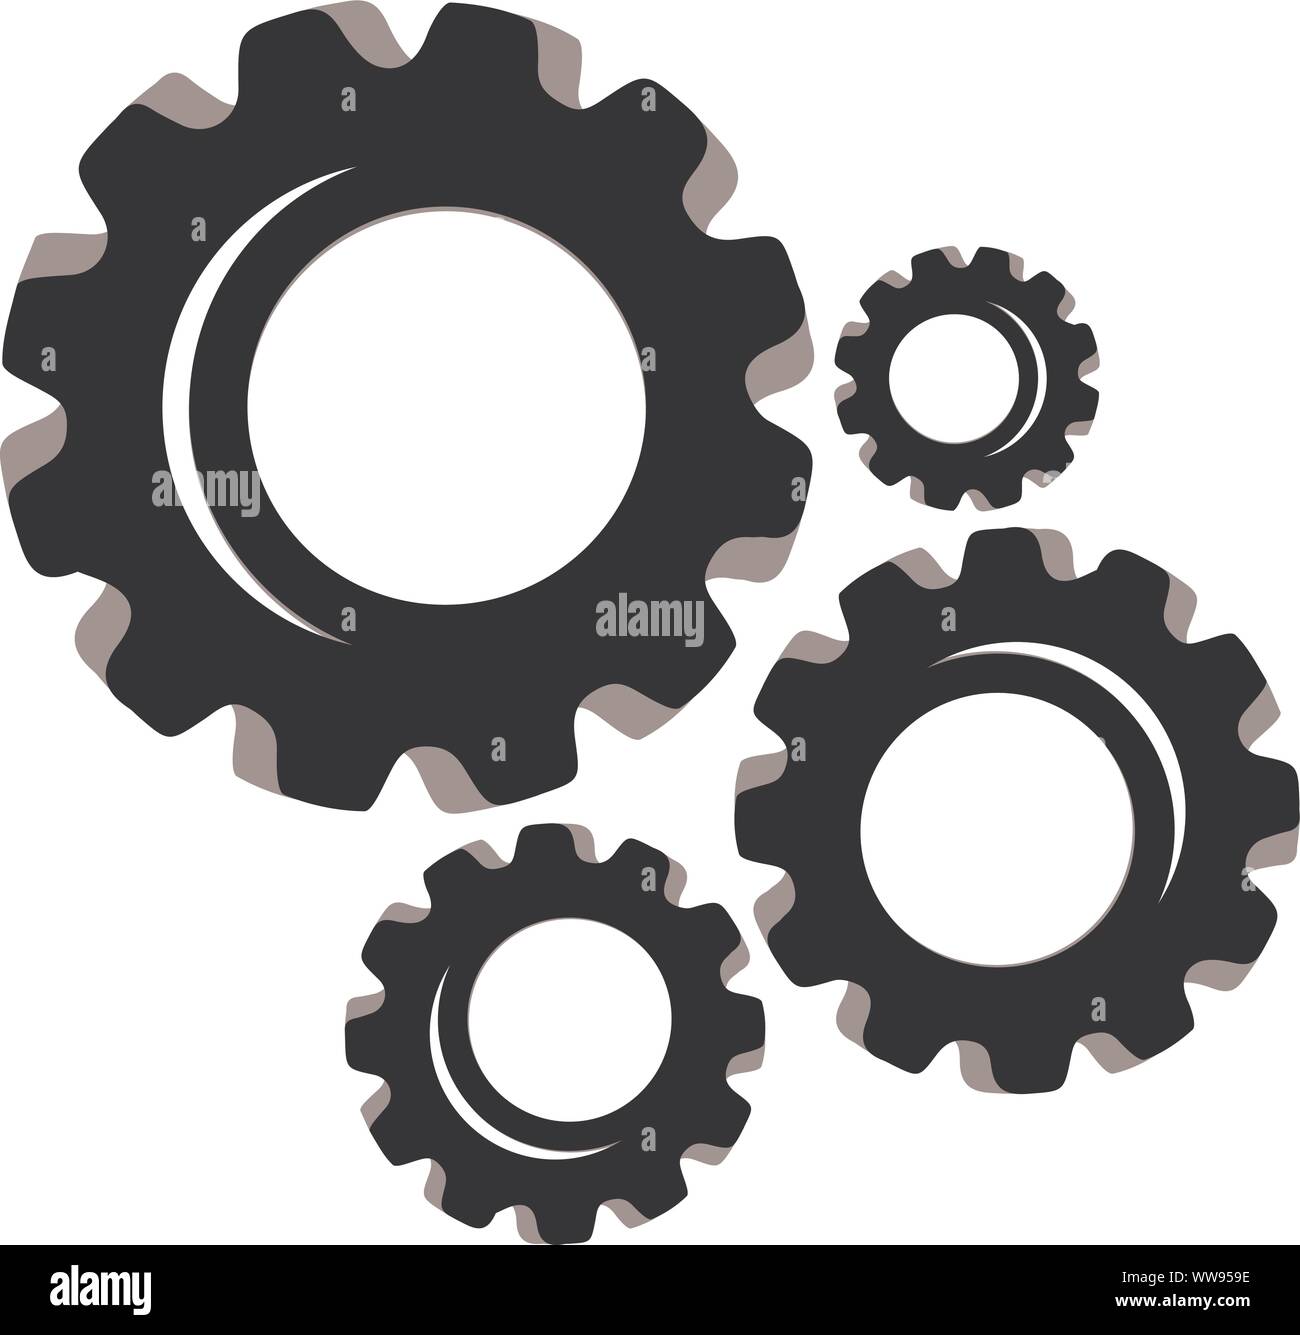 Gears and cogs vector illustration in black and white styles Stock Vector